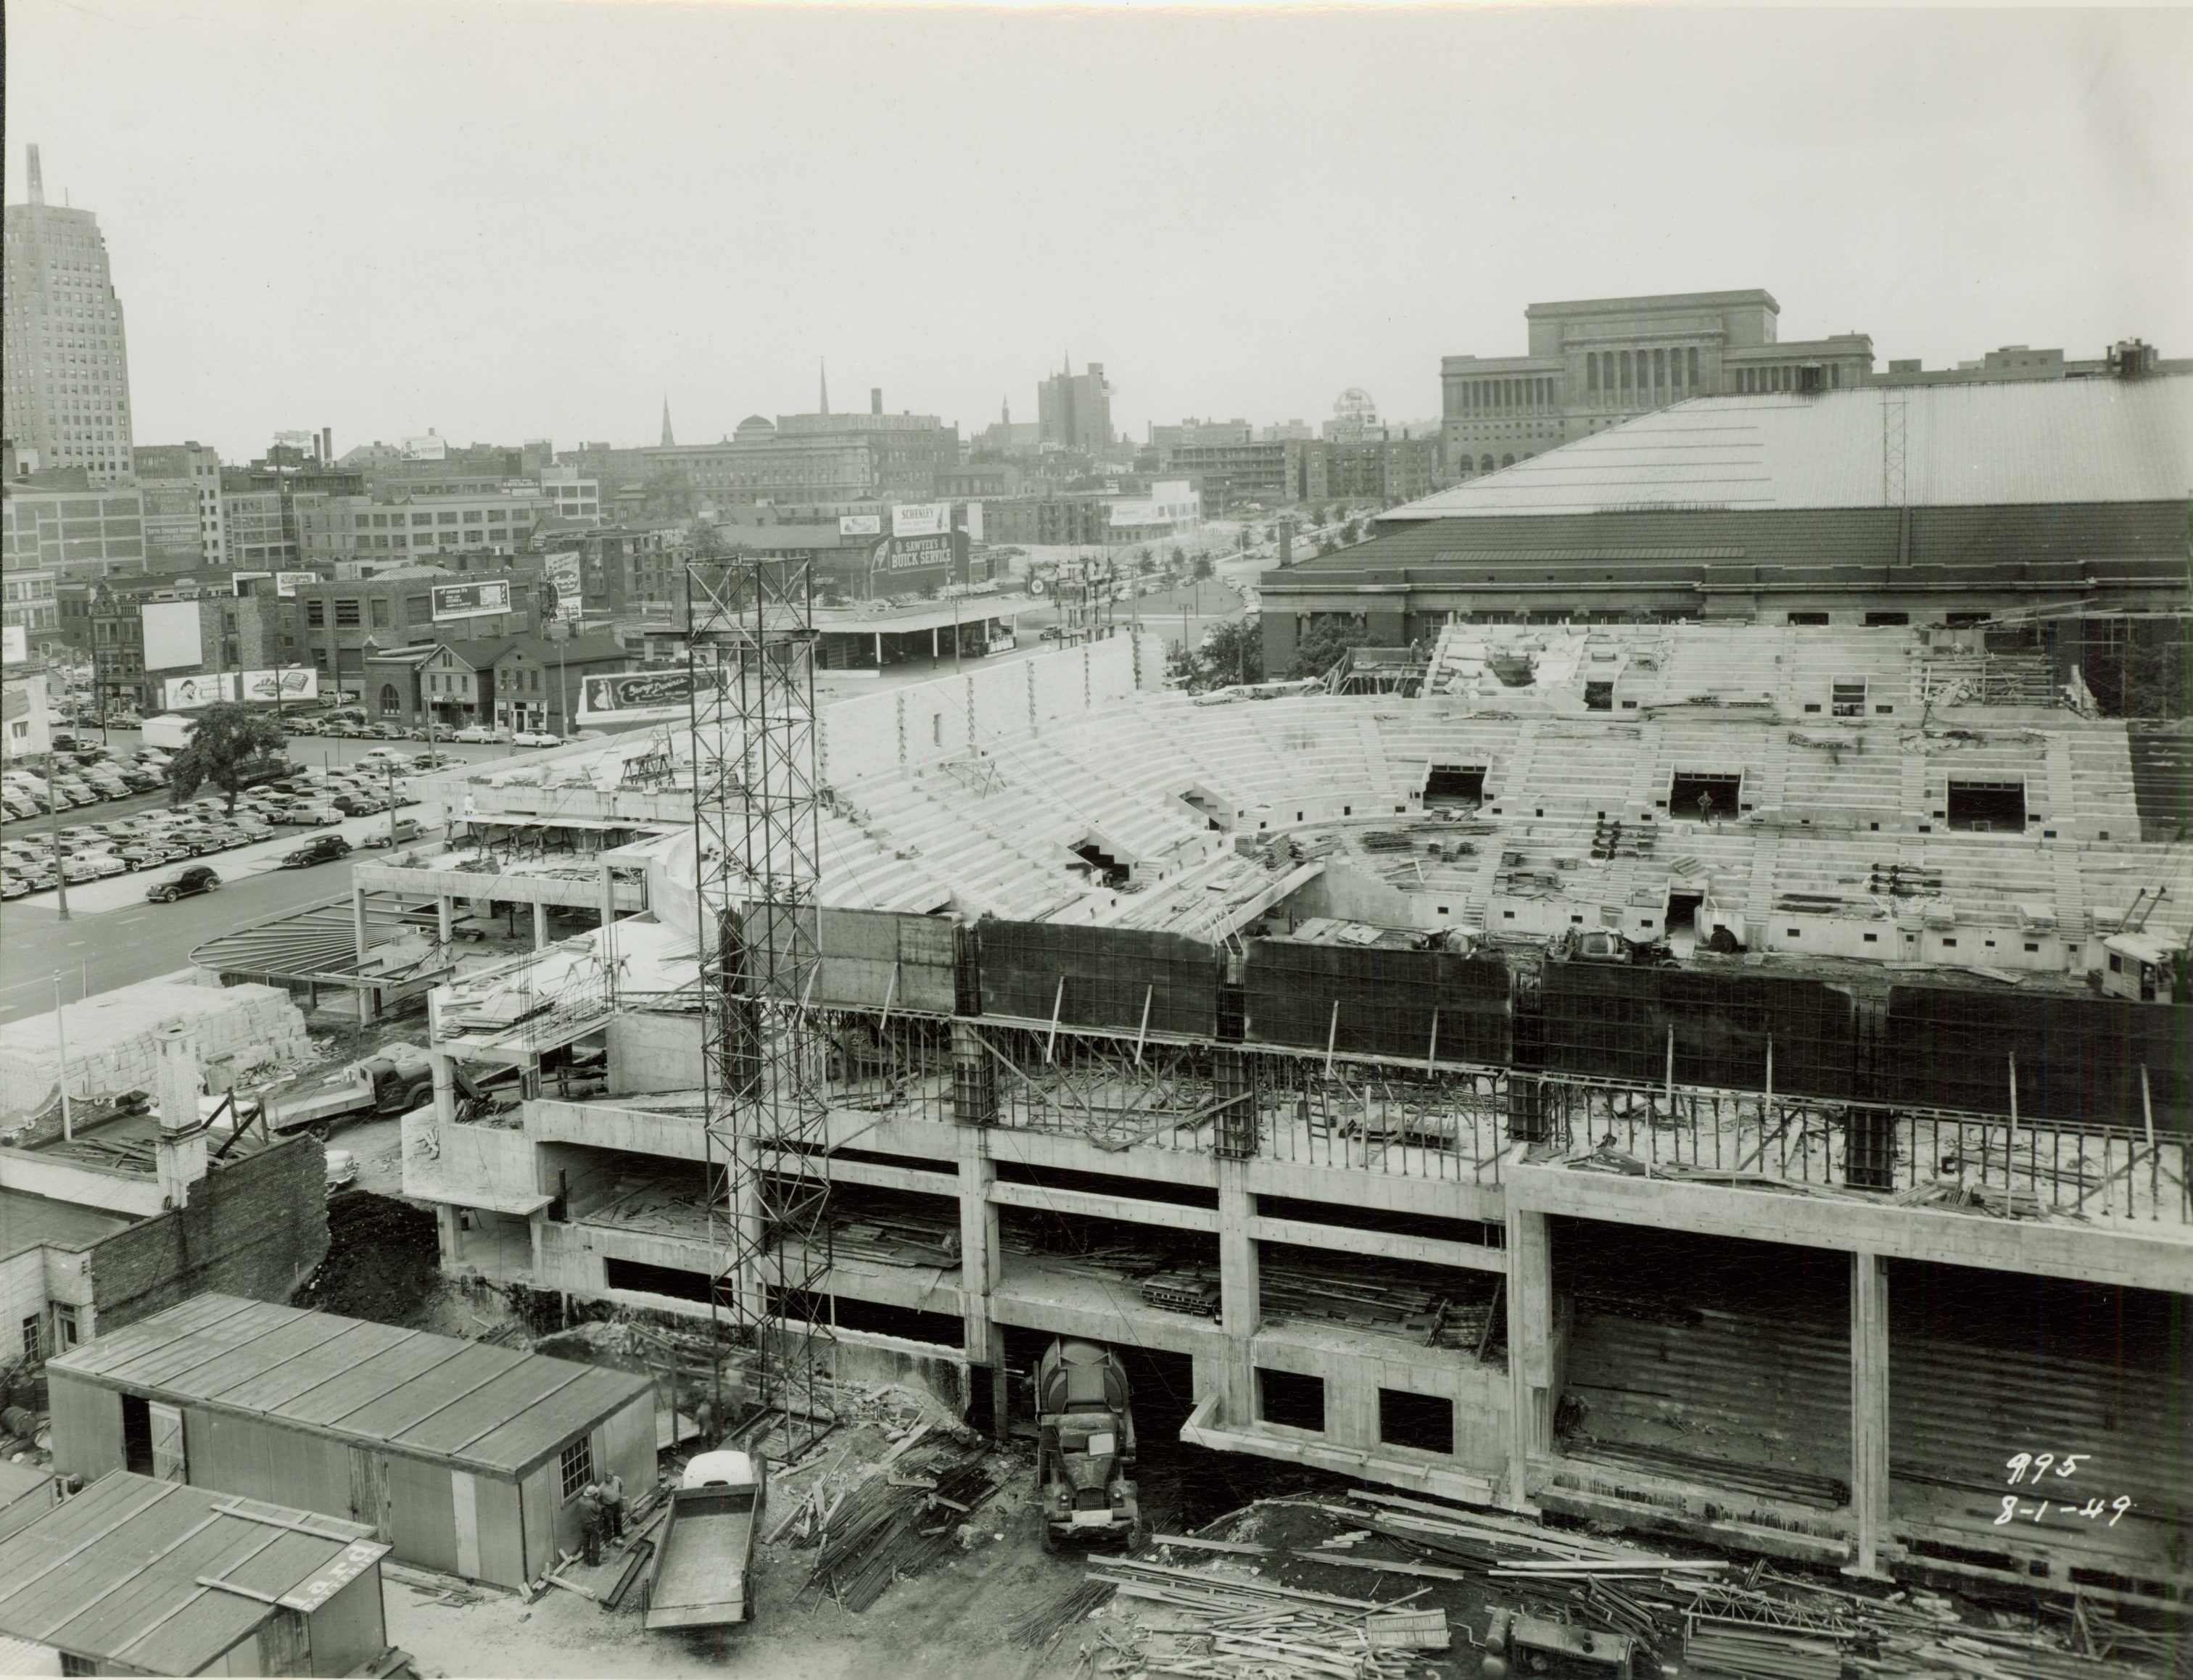 The construction of the Milwaukee Arena, completed in 1950, was one of the first major initiatives for which the Greater Milwaukee Committee advocated. It is now known as the UWM Panther Arena.